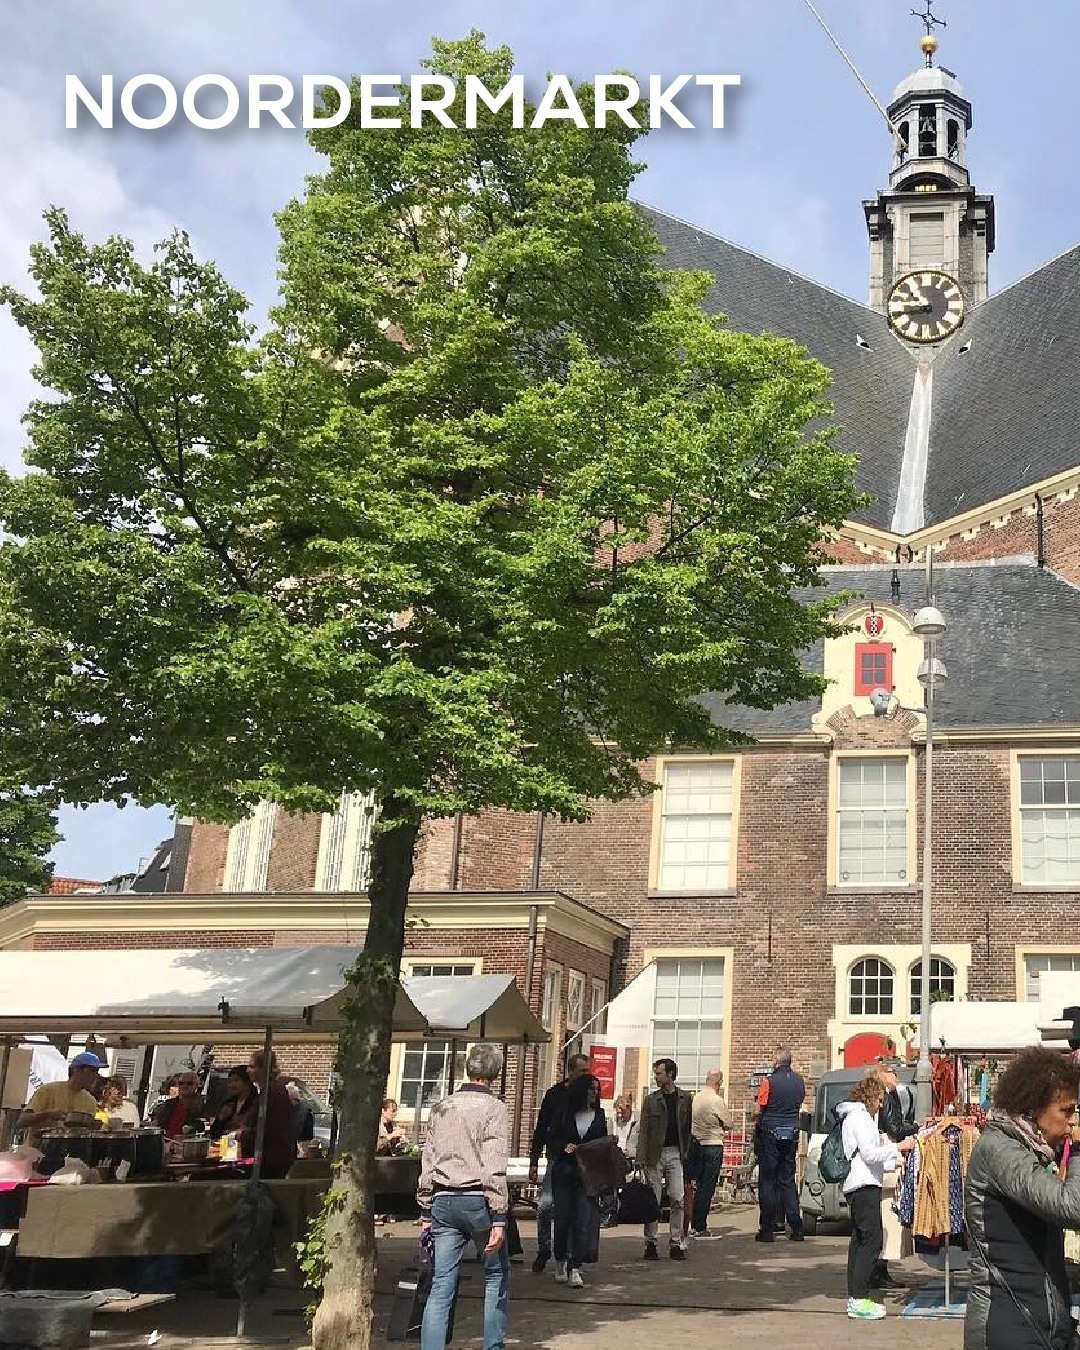 One of our big tips is to visit the lively and colourful Noordermarkt market on Saturday or Monday. It’s filled with stands full of food, cheese, flowers and vintage items. And of course, it’s a great activity to combine with visiting the Vincent meets Rembrandt experience 🌻

Tickets in our bio!

#vincentmeetsrembrandt #amsterdamhotspot #amsterdamtodo #amsterdambucketlist #amsterdammuseum